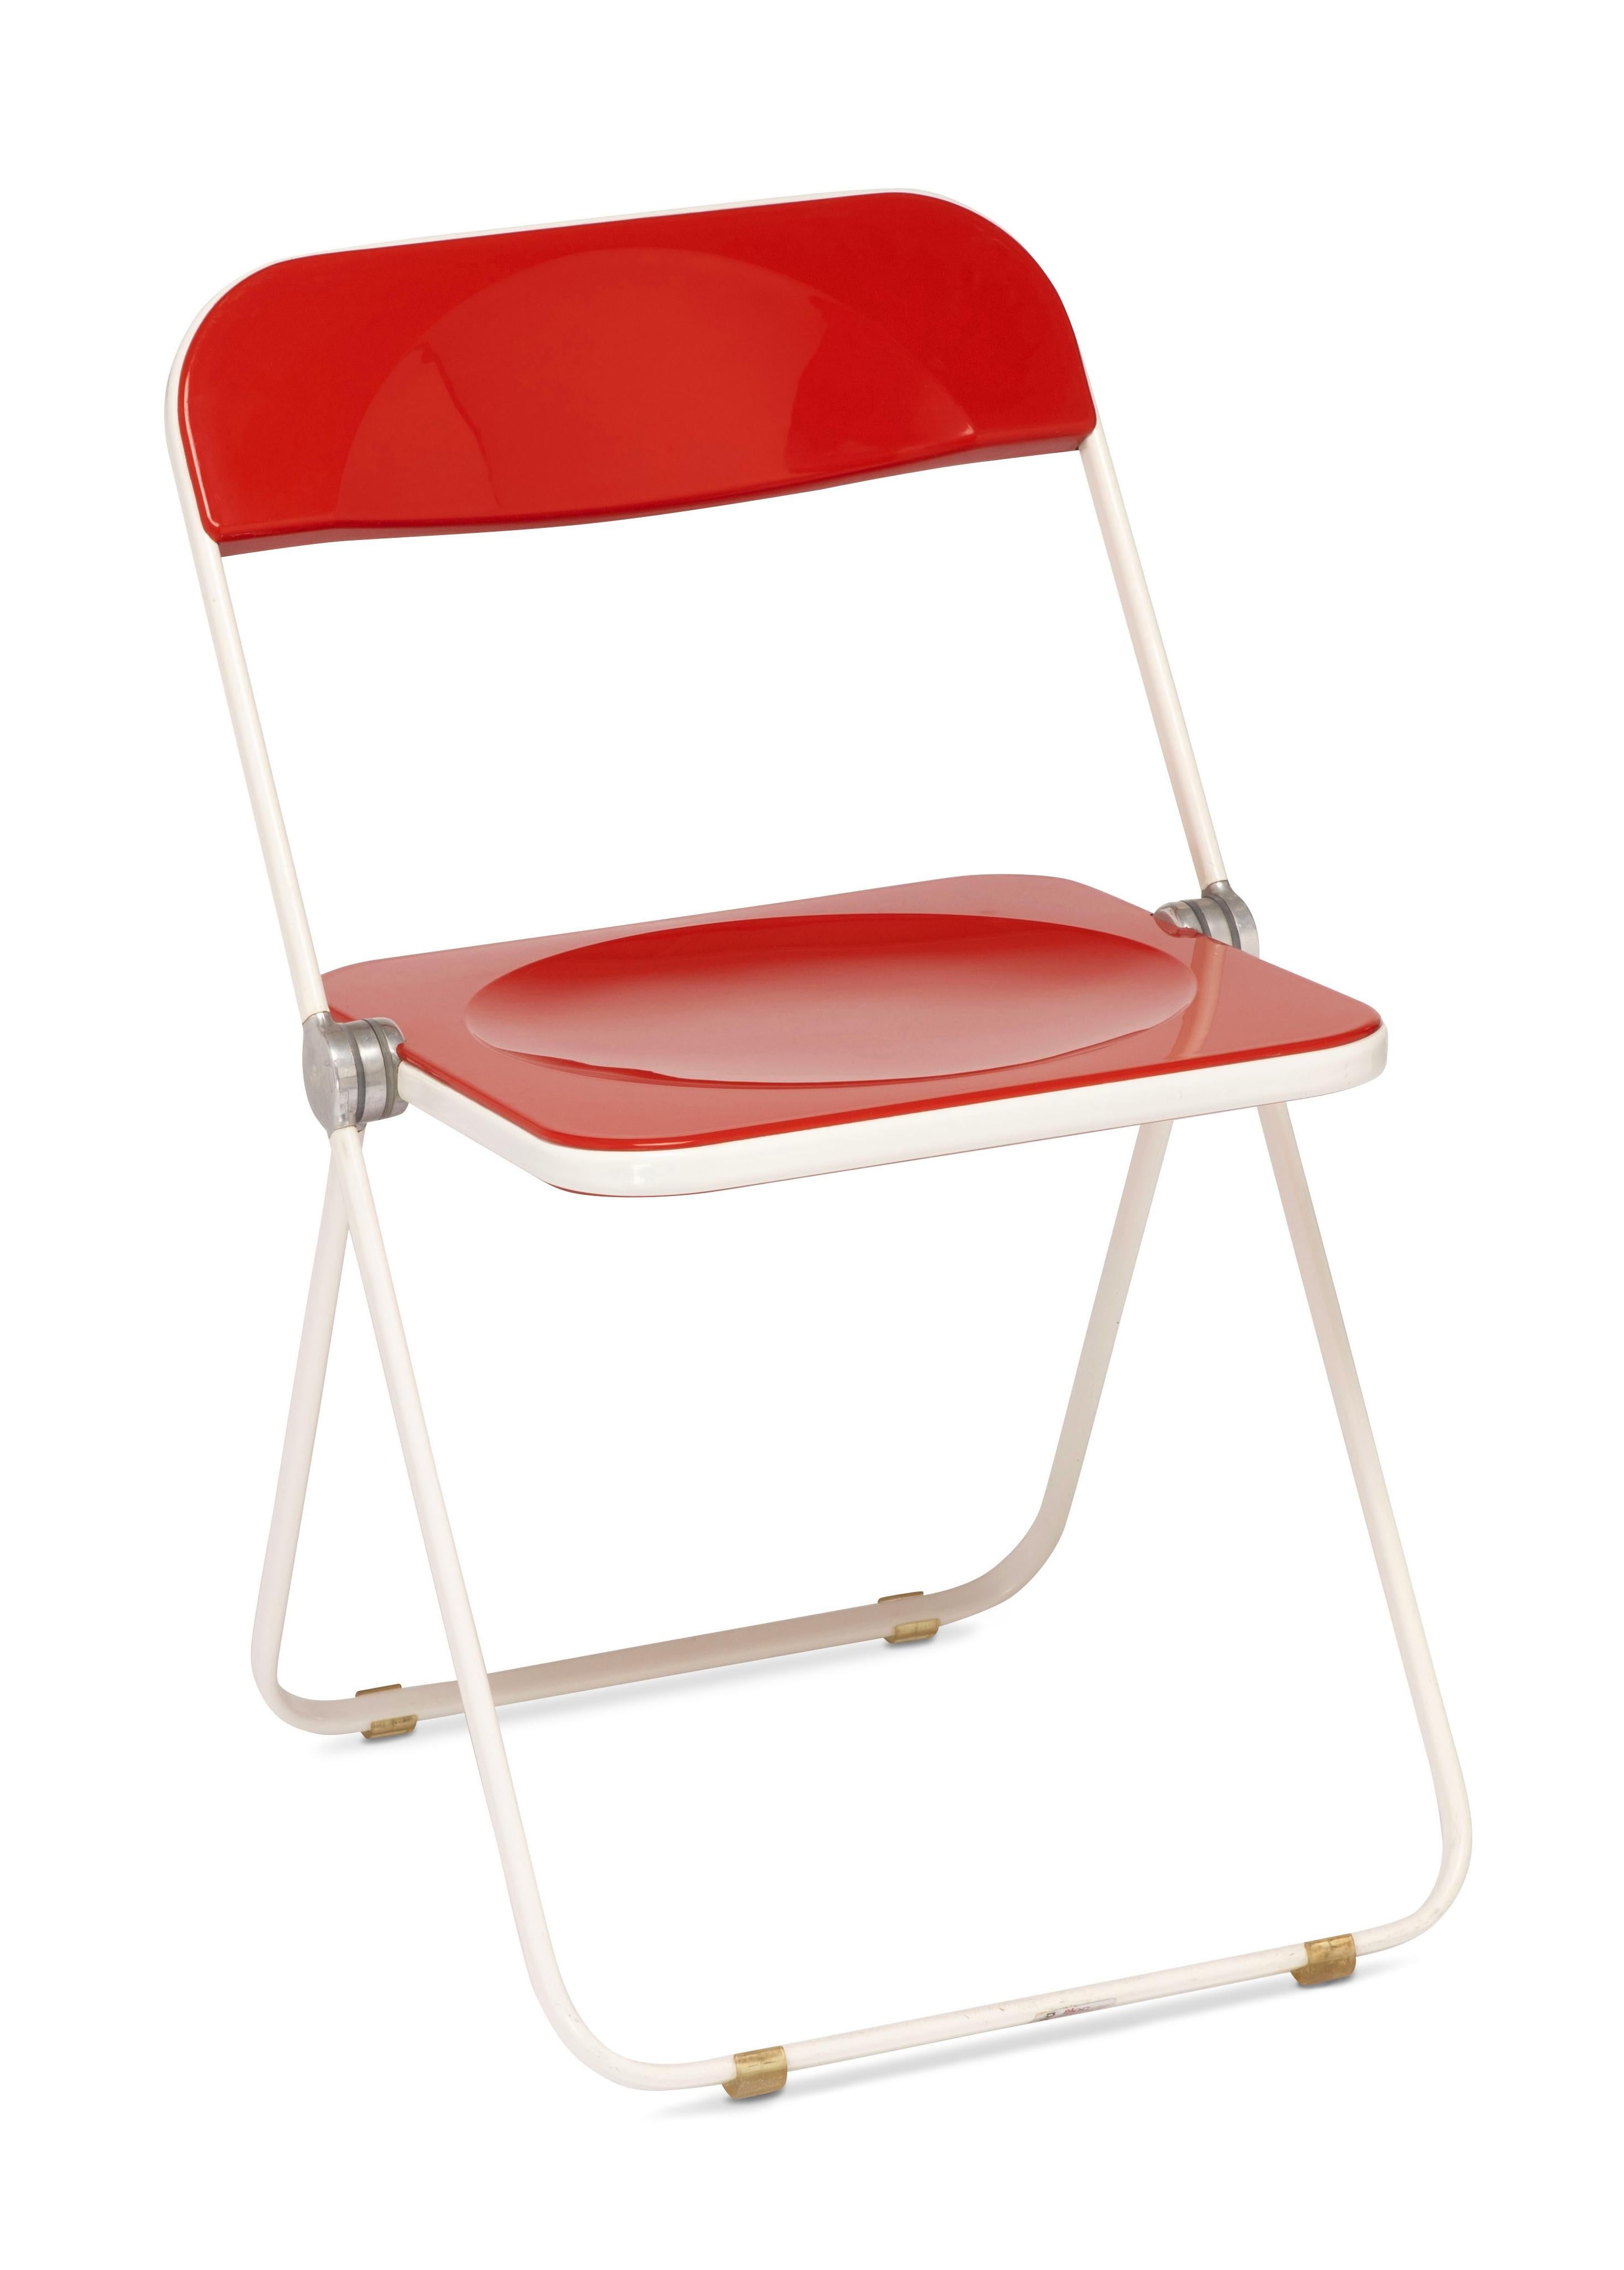 The Plia is one of Anonima Castelli's all-time landmarks and an iconic example of “Made in Italy” design. Over the years, he was awarded the “compasso d’oro adi” twice. 

Originally designed by Giancarlo Piretti in 1967, the Plia chair was